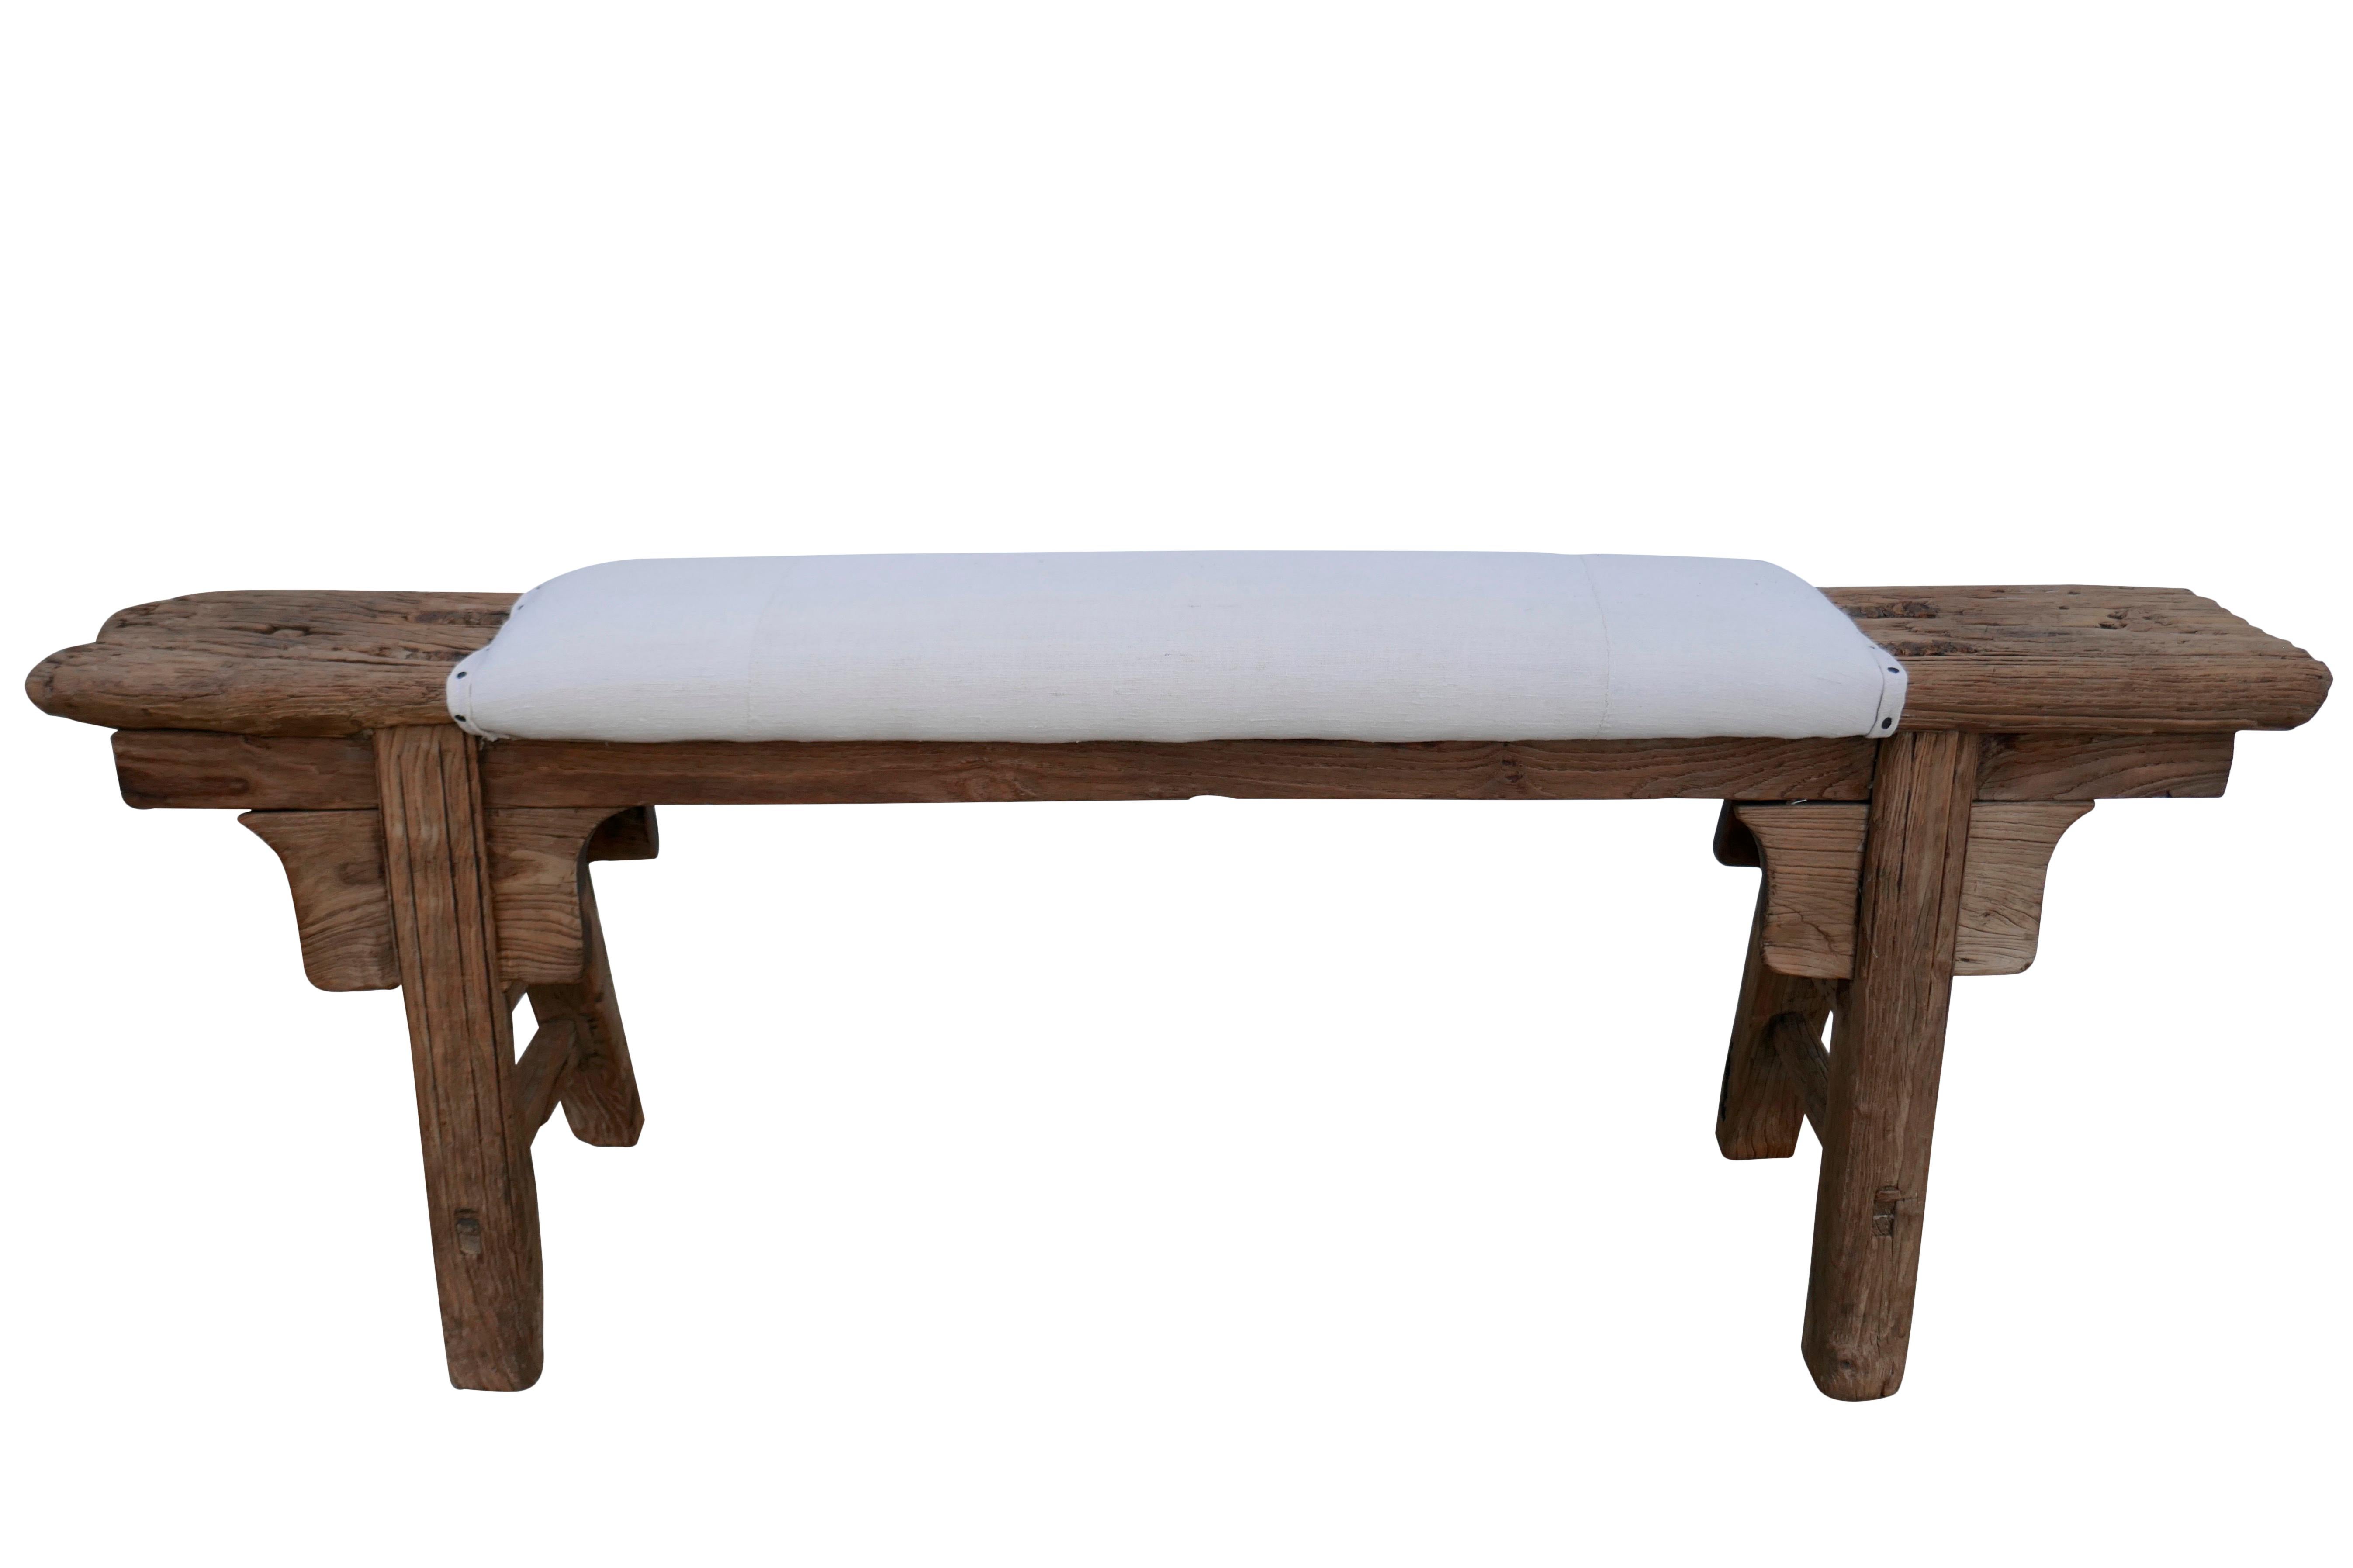 One-of-a-kind authentic antique Asian elmwood bench, upholstered in authentic vintage French hand-spun pure linen in natural tone. Primitively hand-built with mortise & tenon joinery, showing much desirable natural age character and patina.